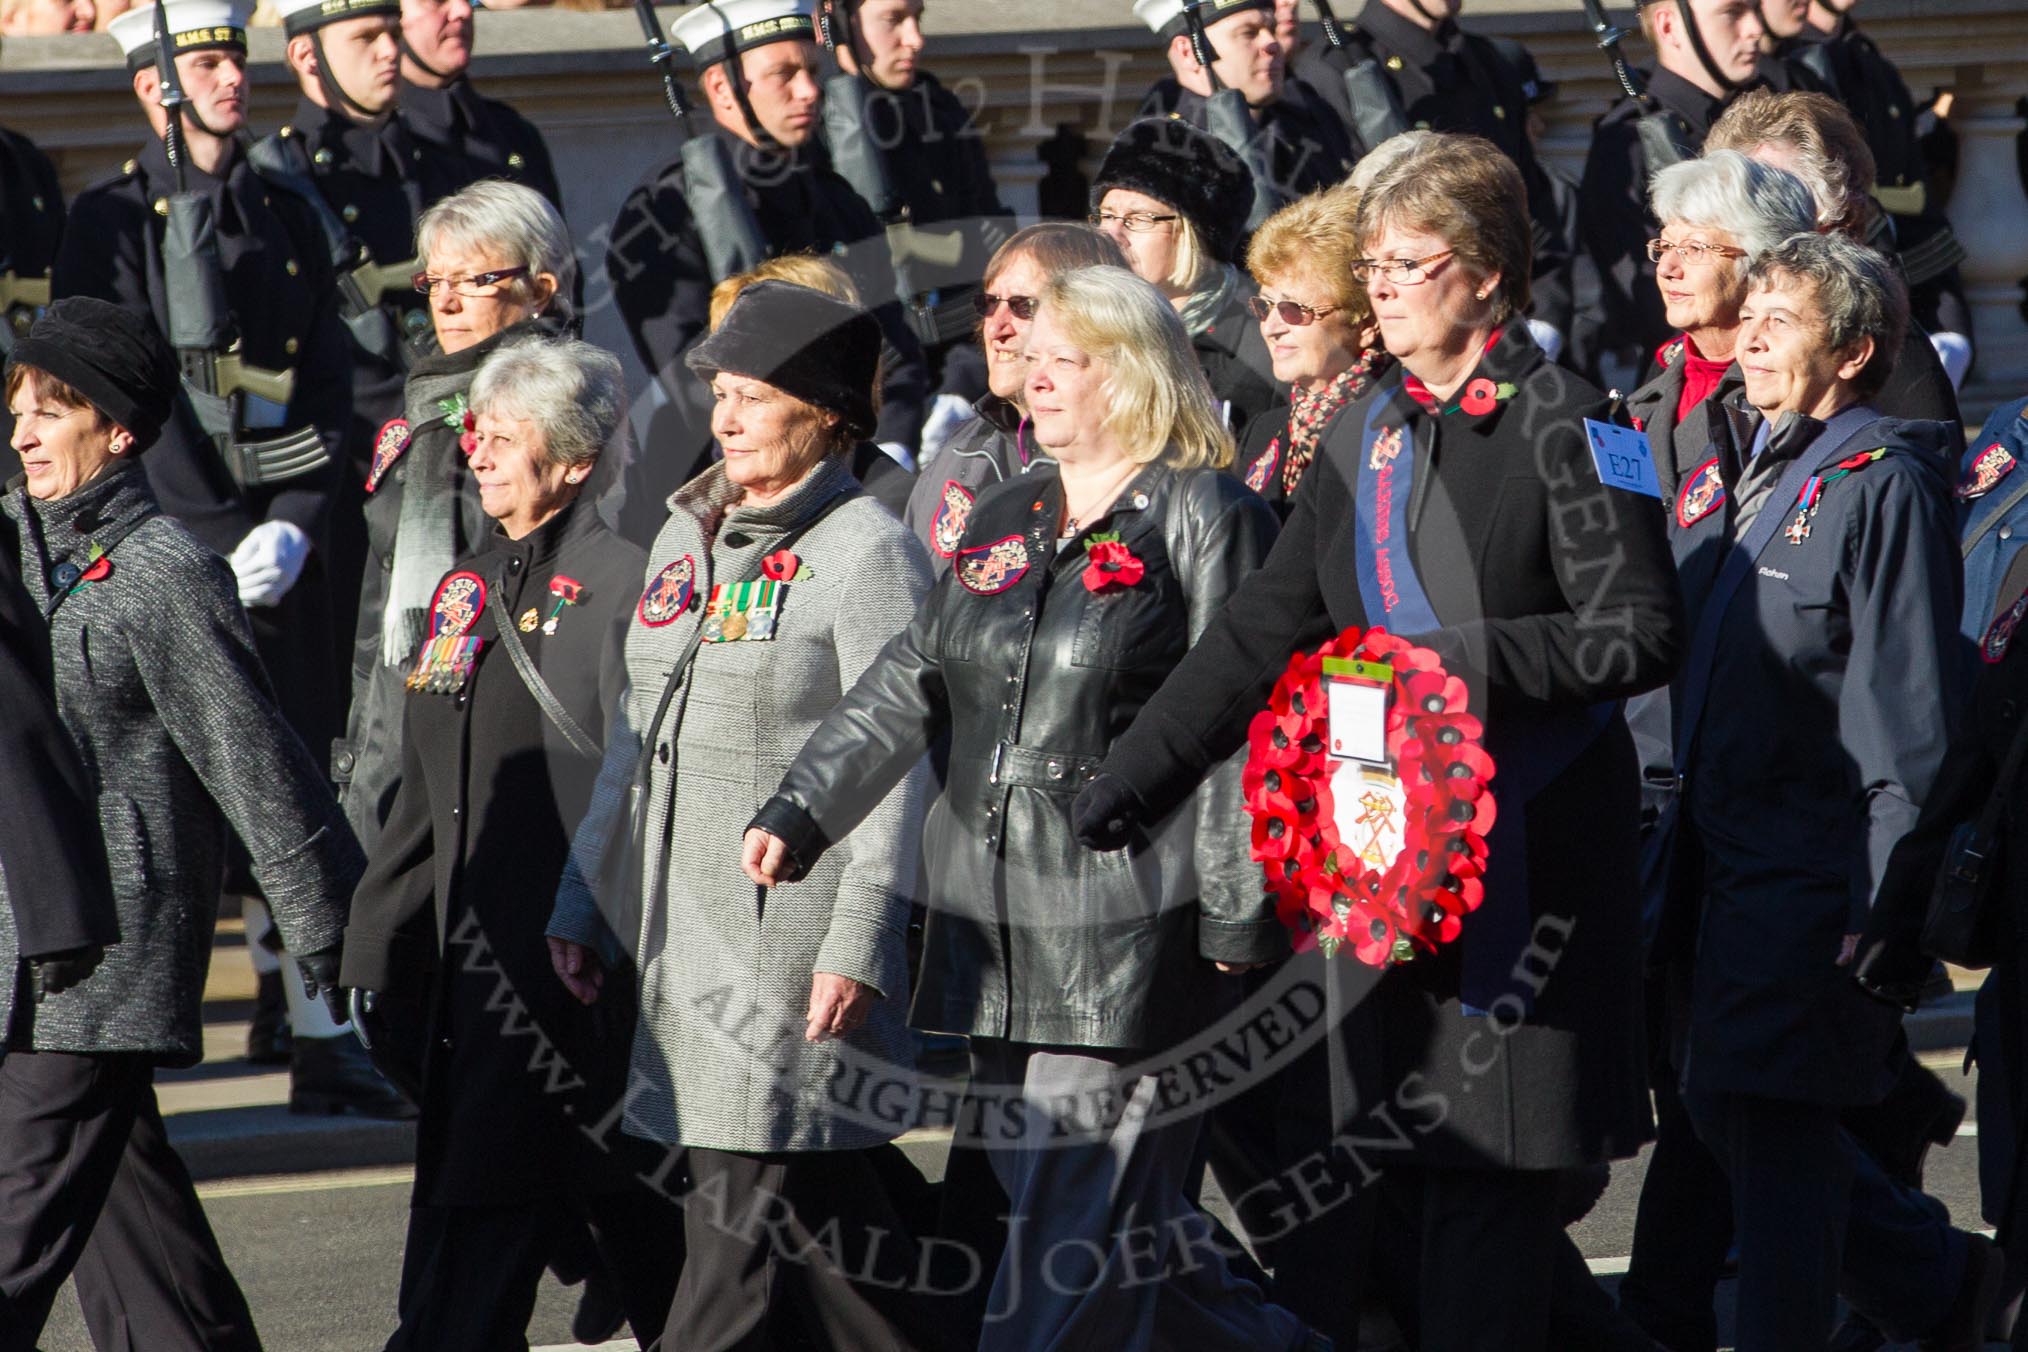 Remembrance Sunday 2012 Cenotaph March Past: Group E27 - Queen Alexandra's Royal Naval Nursing Service..
Whitehall, Cenotaph,
London SW1,

United Kingdom,
on 11 November 2012 at 11:41, image #194